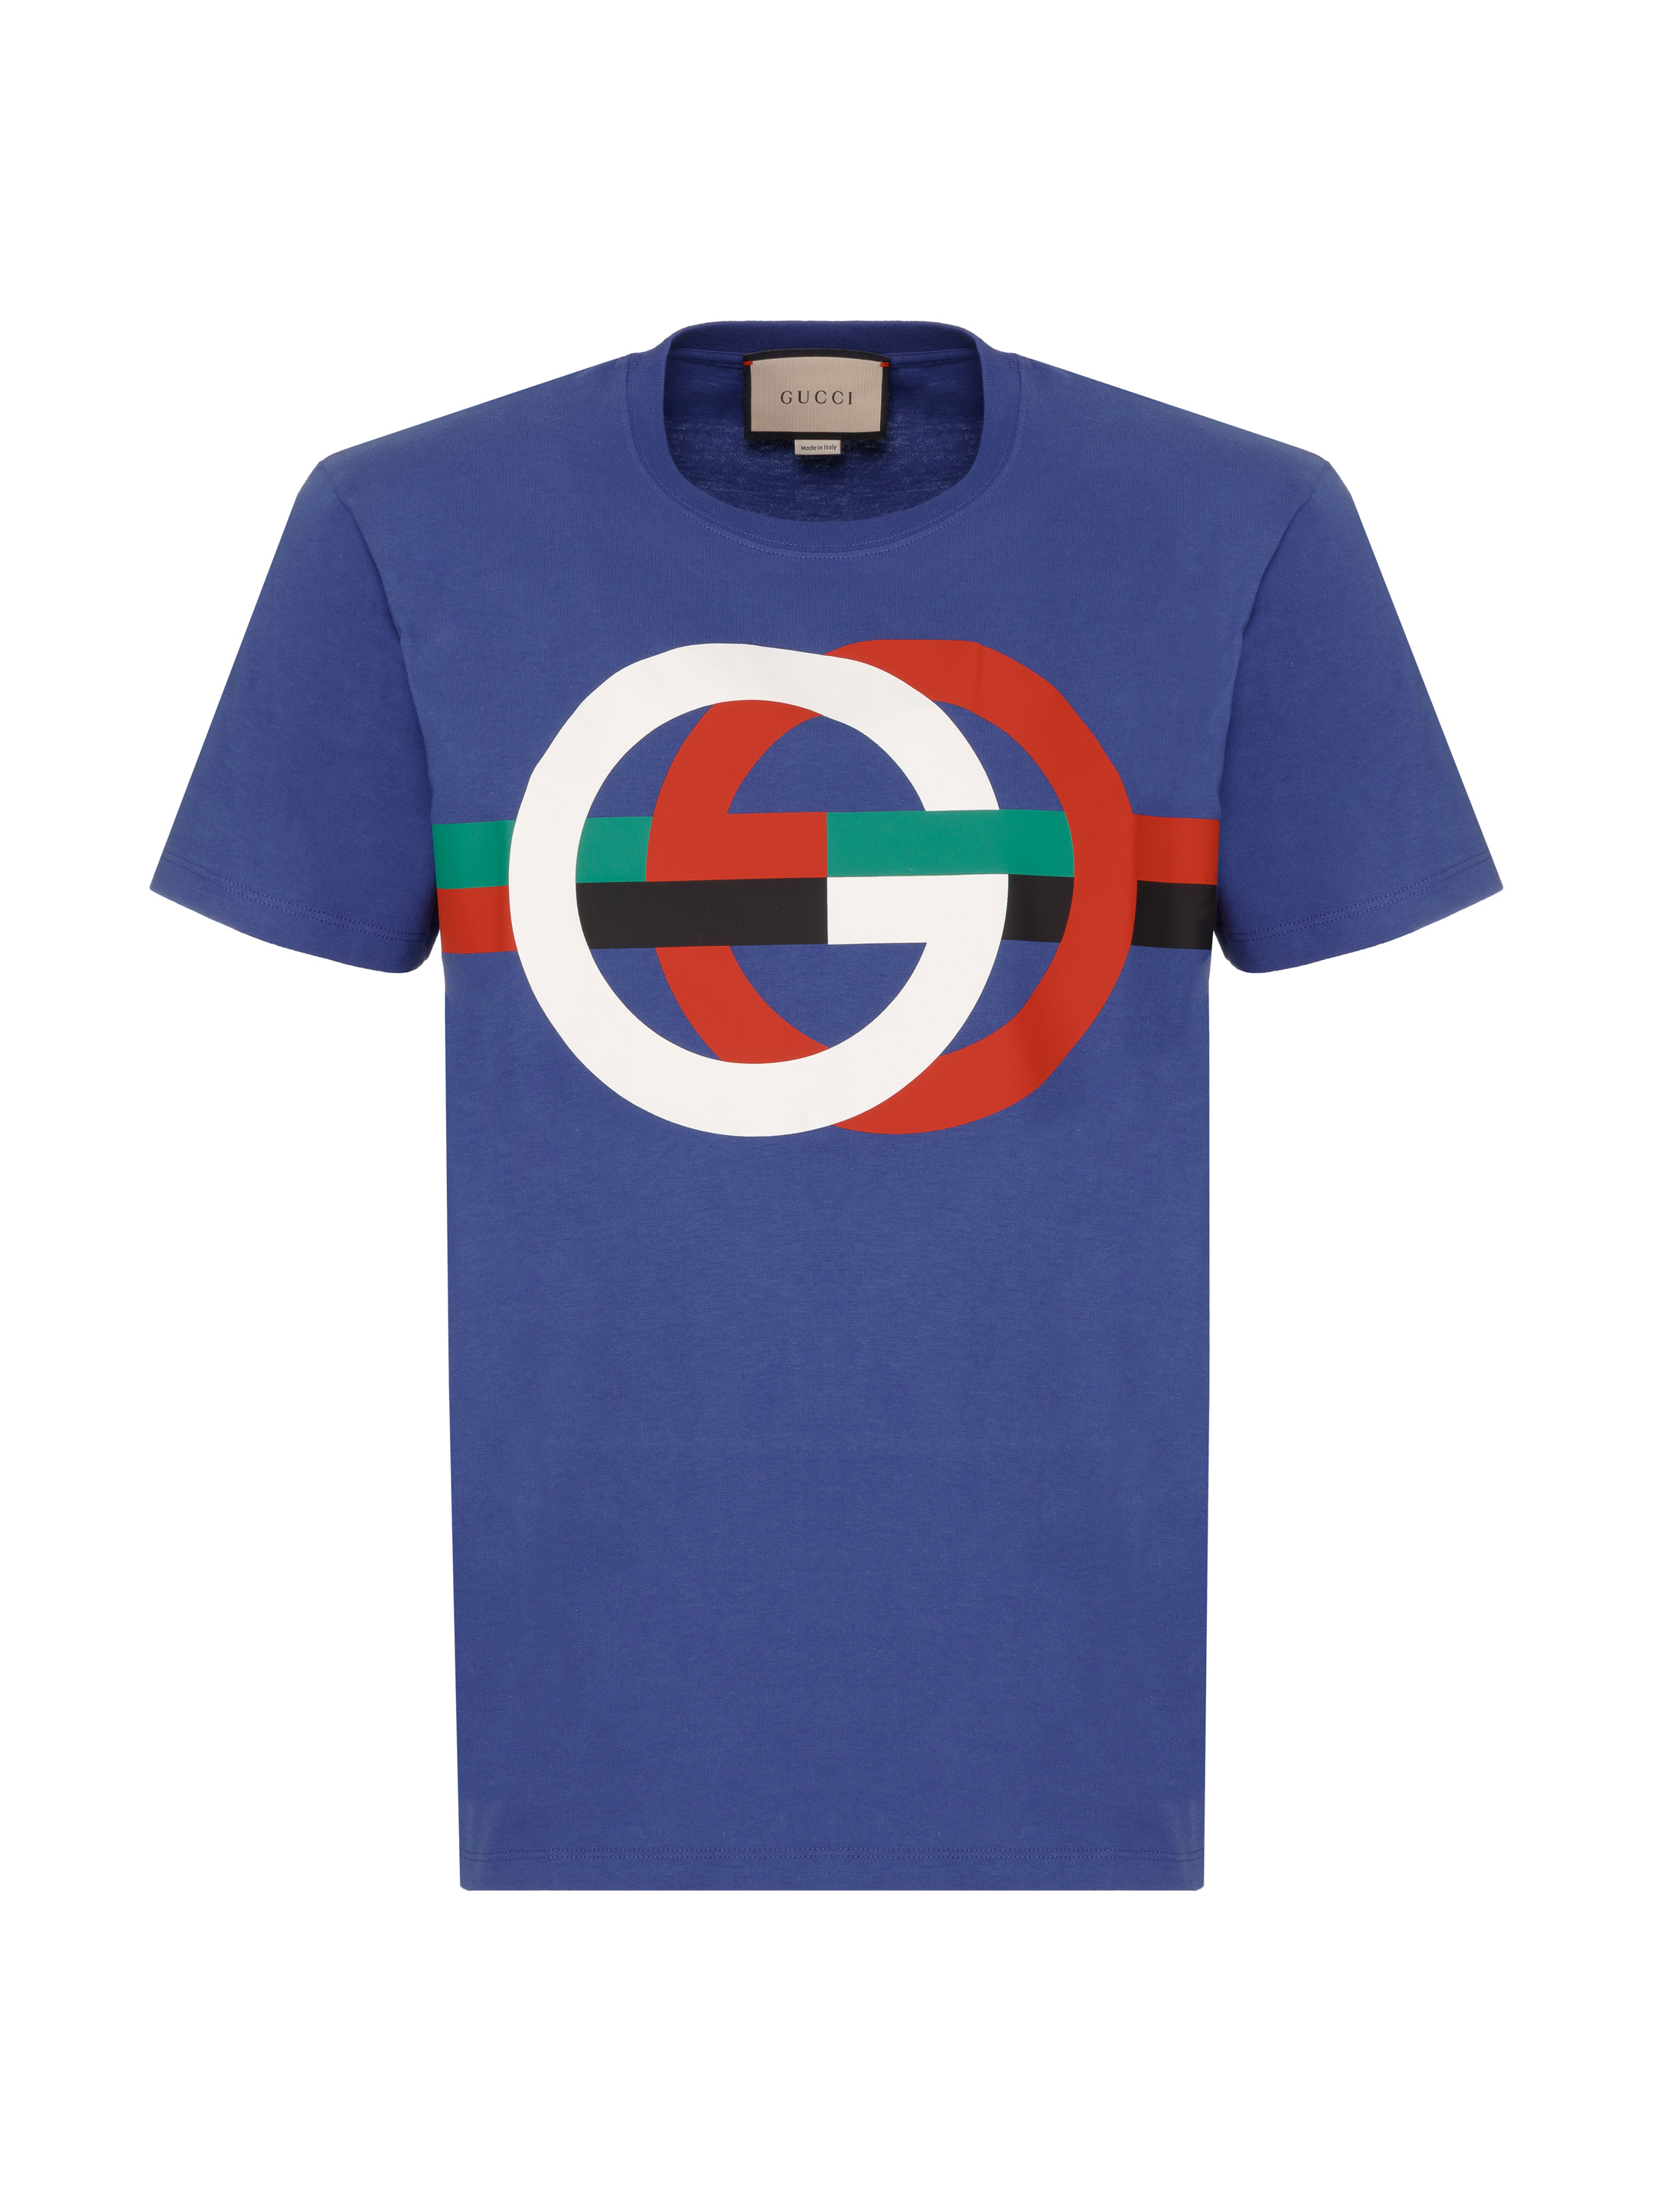 Gucci men's Logo cotton t-shirt - buy for 246400 KZT in the official Viled  online store, art. 548334 